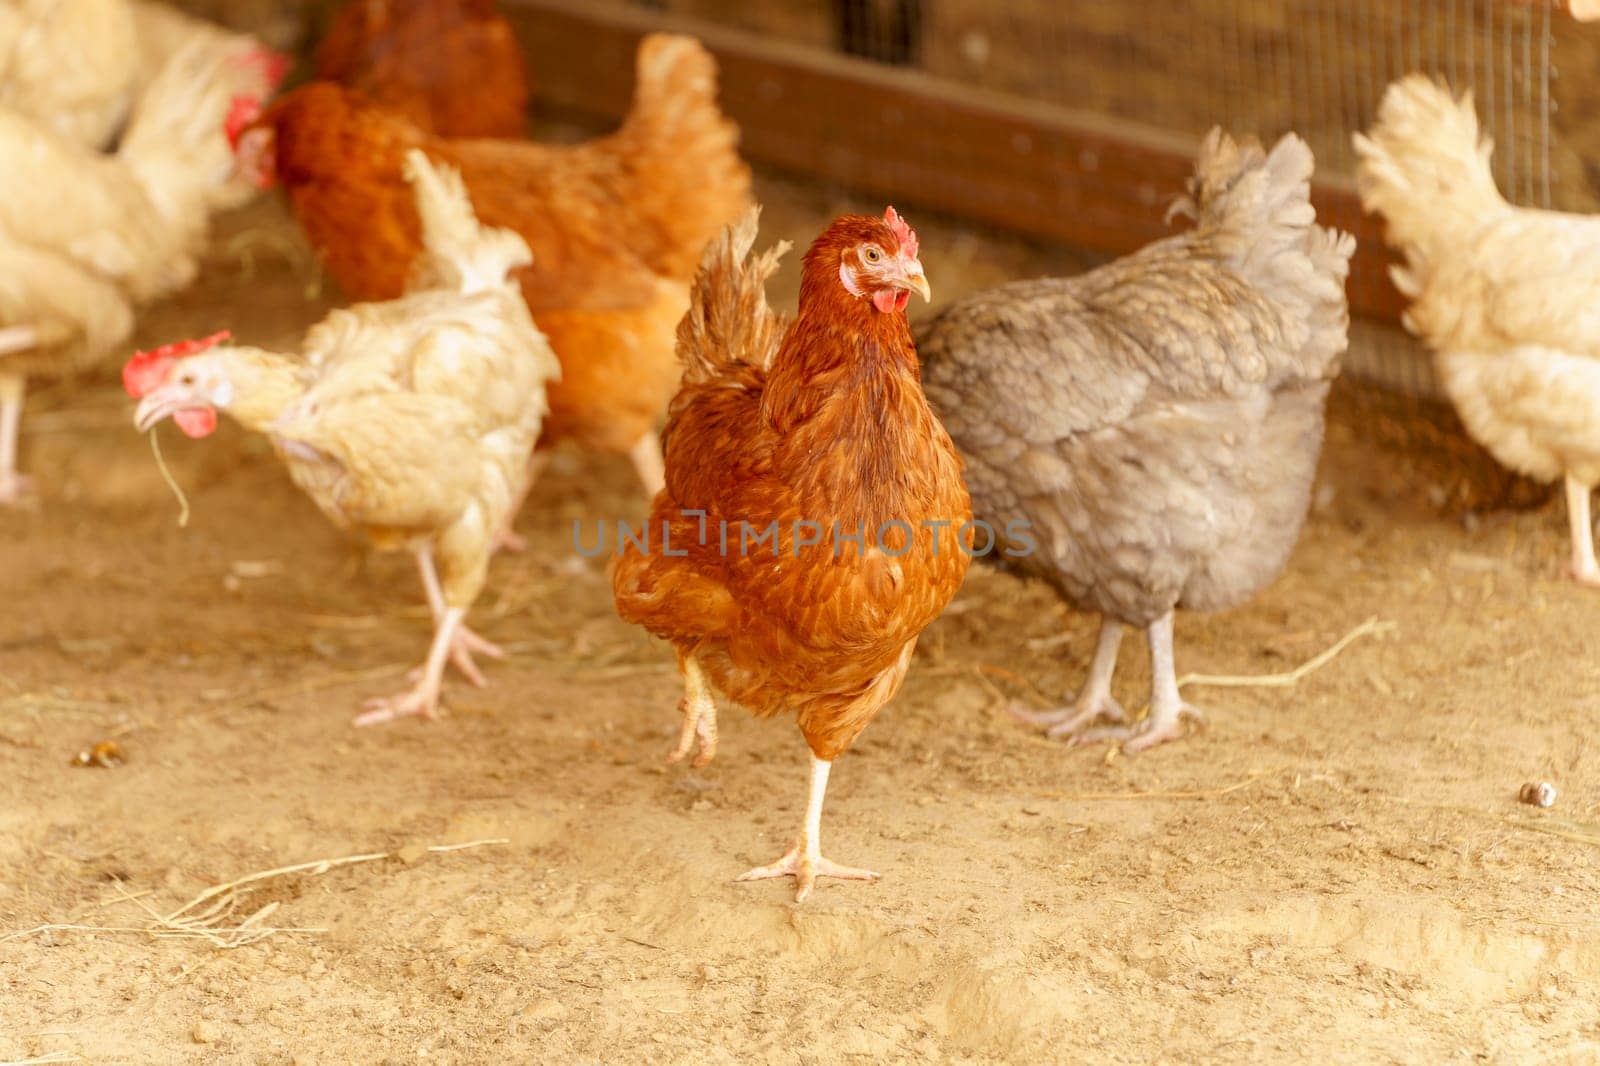 Group of chickens standing in a row, each clucking and pecking at the ground.